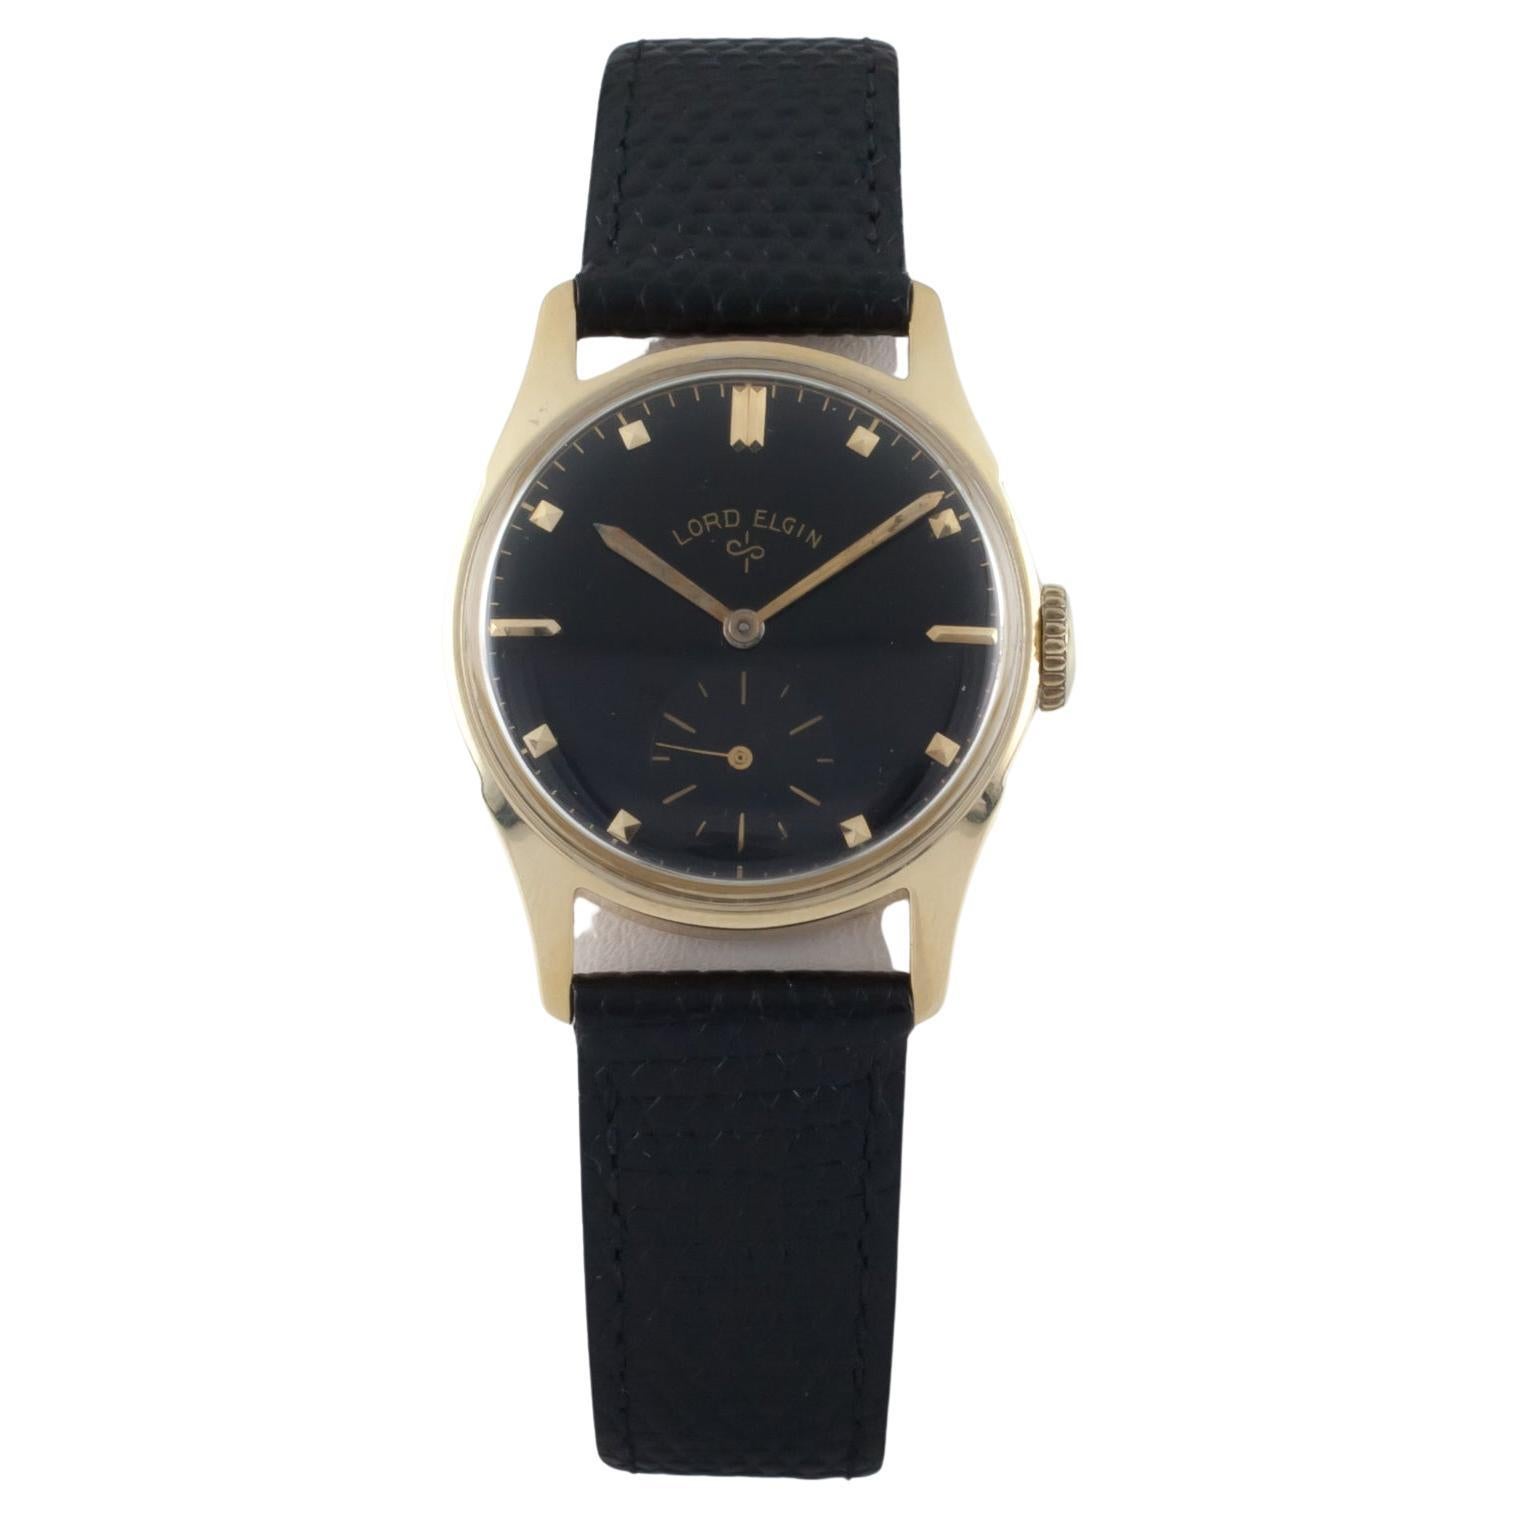 Lord Elgin Vintage 14k Yellow Gold Hand-Winding Watch Black Dial 1953 Mov #556 For Sale